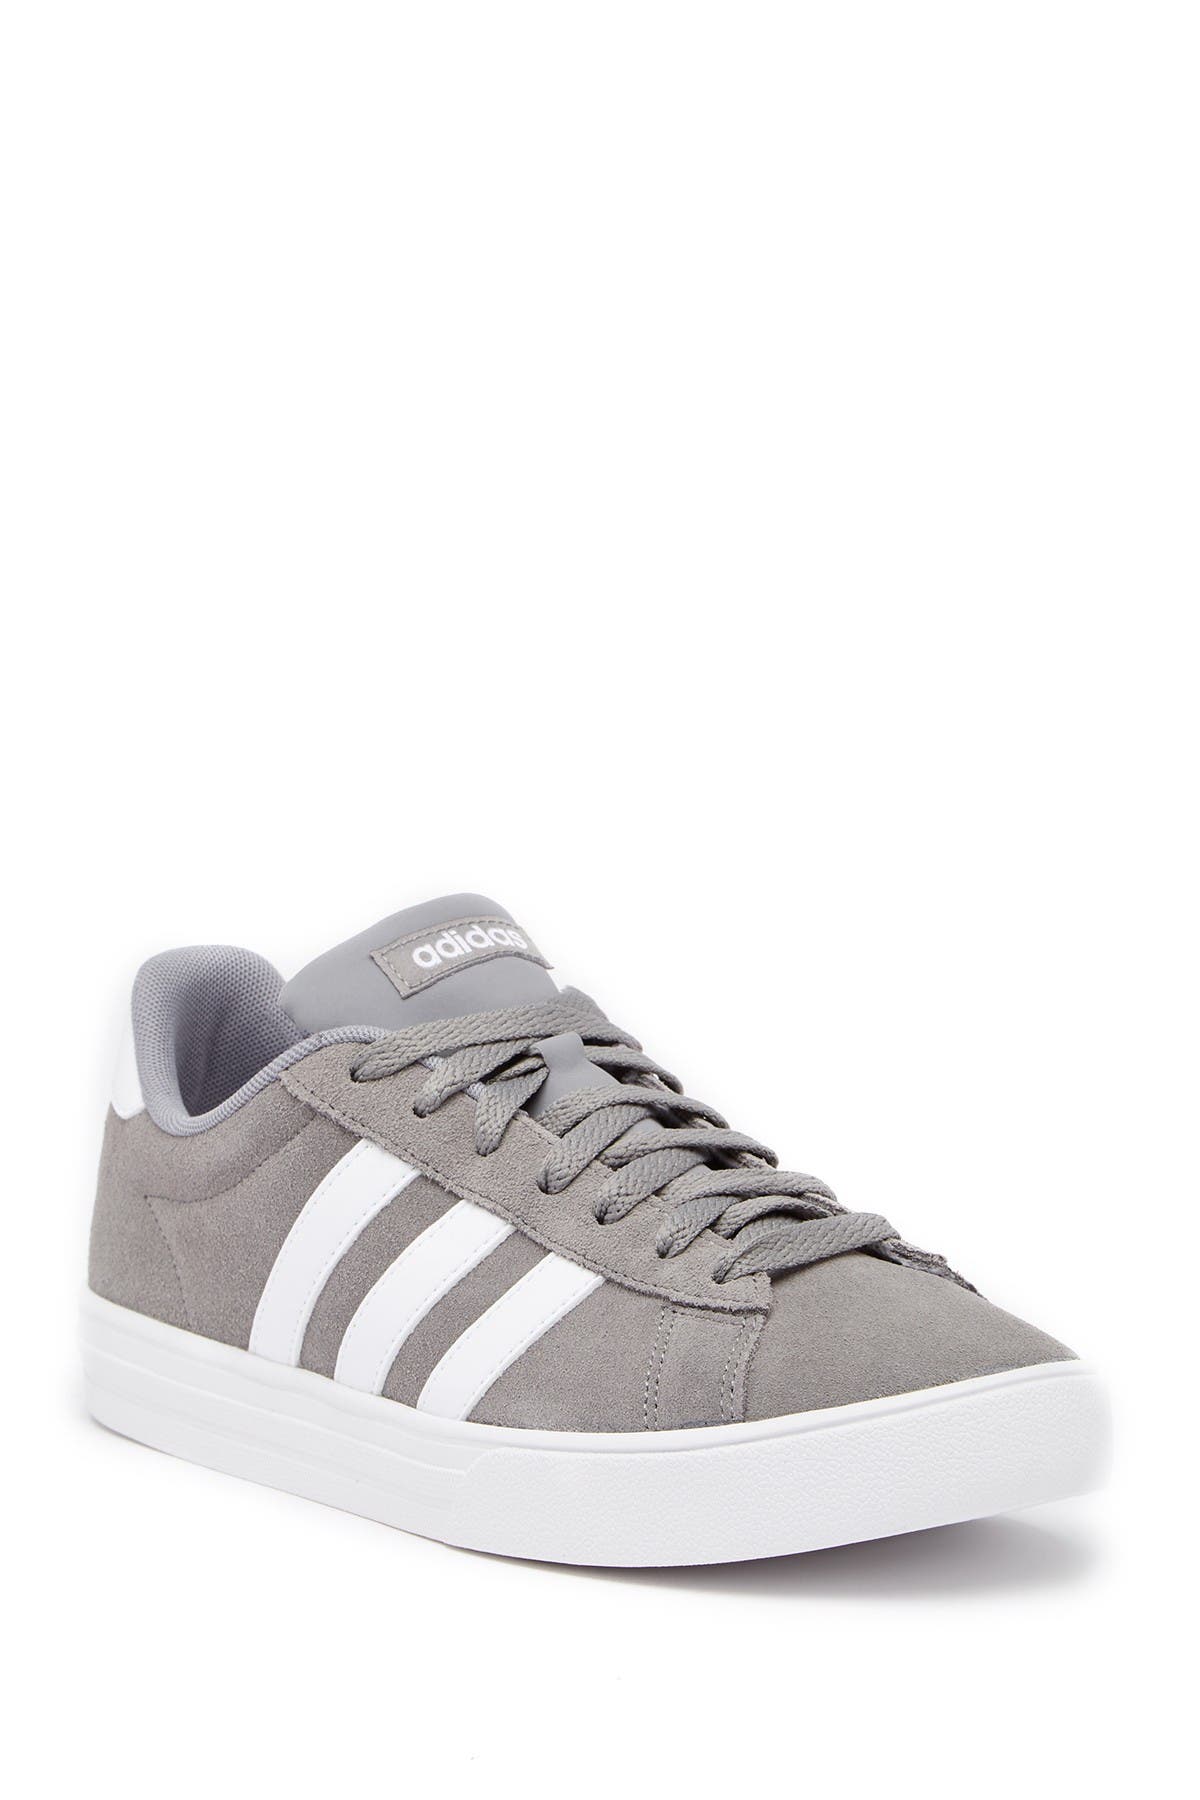 adidas | Daily 2.0 Suede Sneaker 